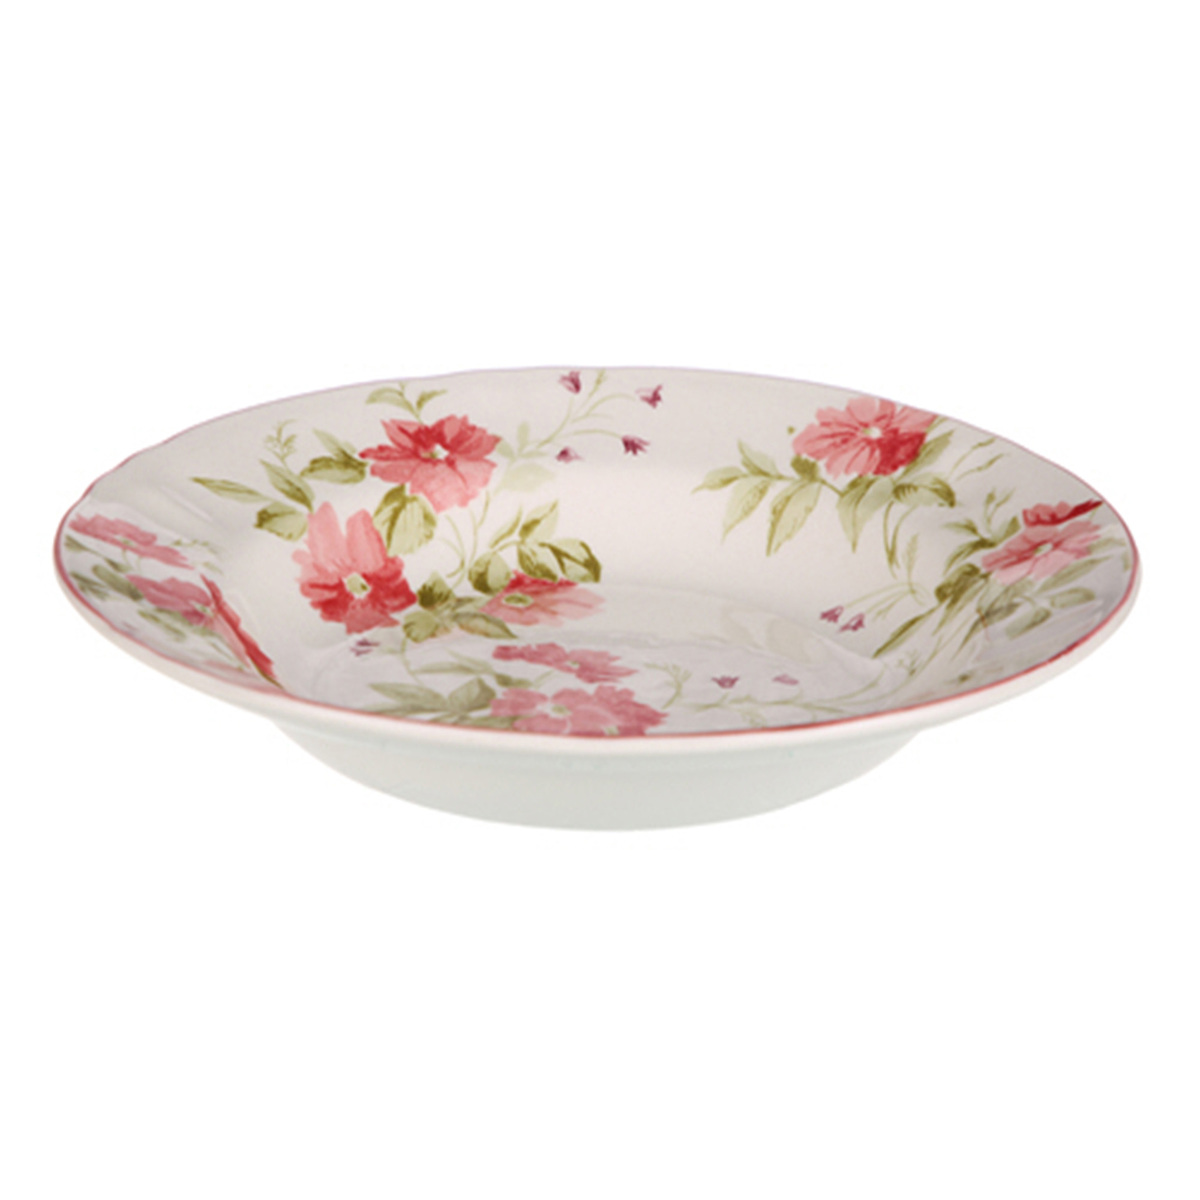 Claytan Wild Rose Soup Plate, 24 cm, White/ Pink, CLA.SN15417